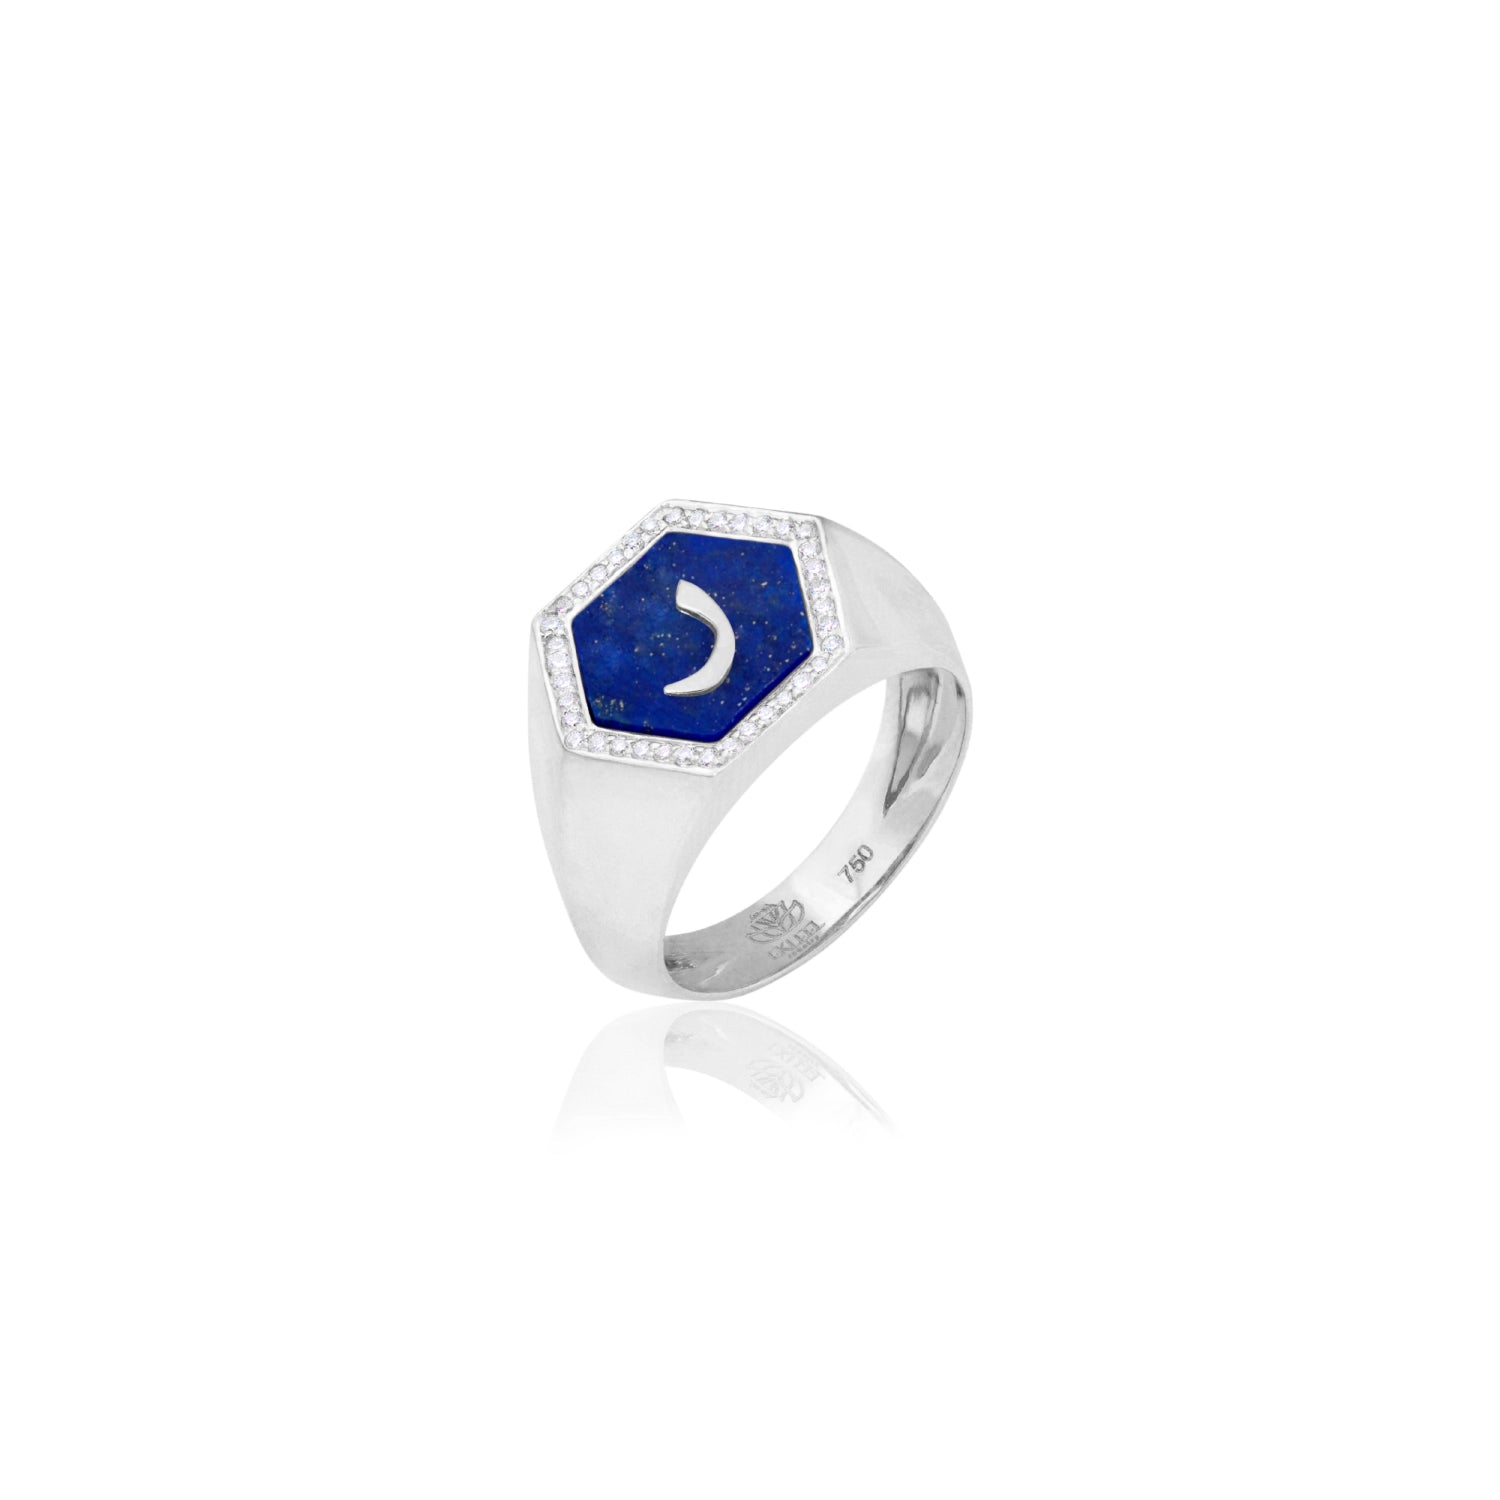 Qamoos 2.0 Letter ر Lapis Lazuli and Diamond Signet Ring in White Gold